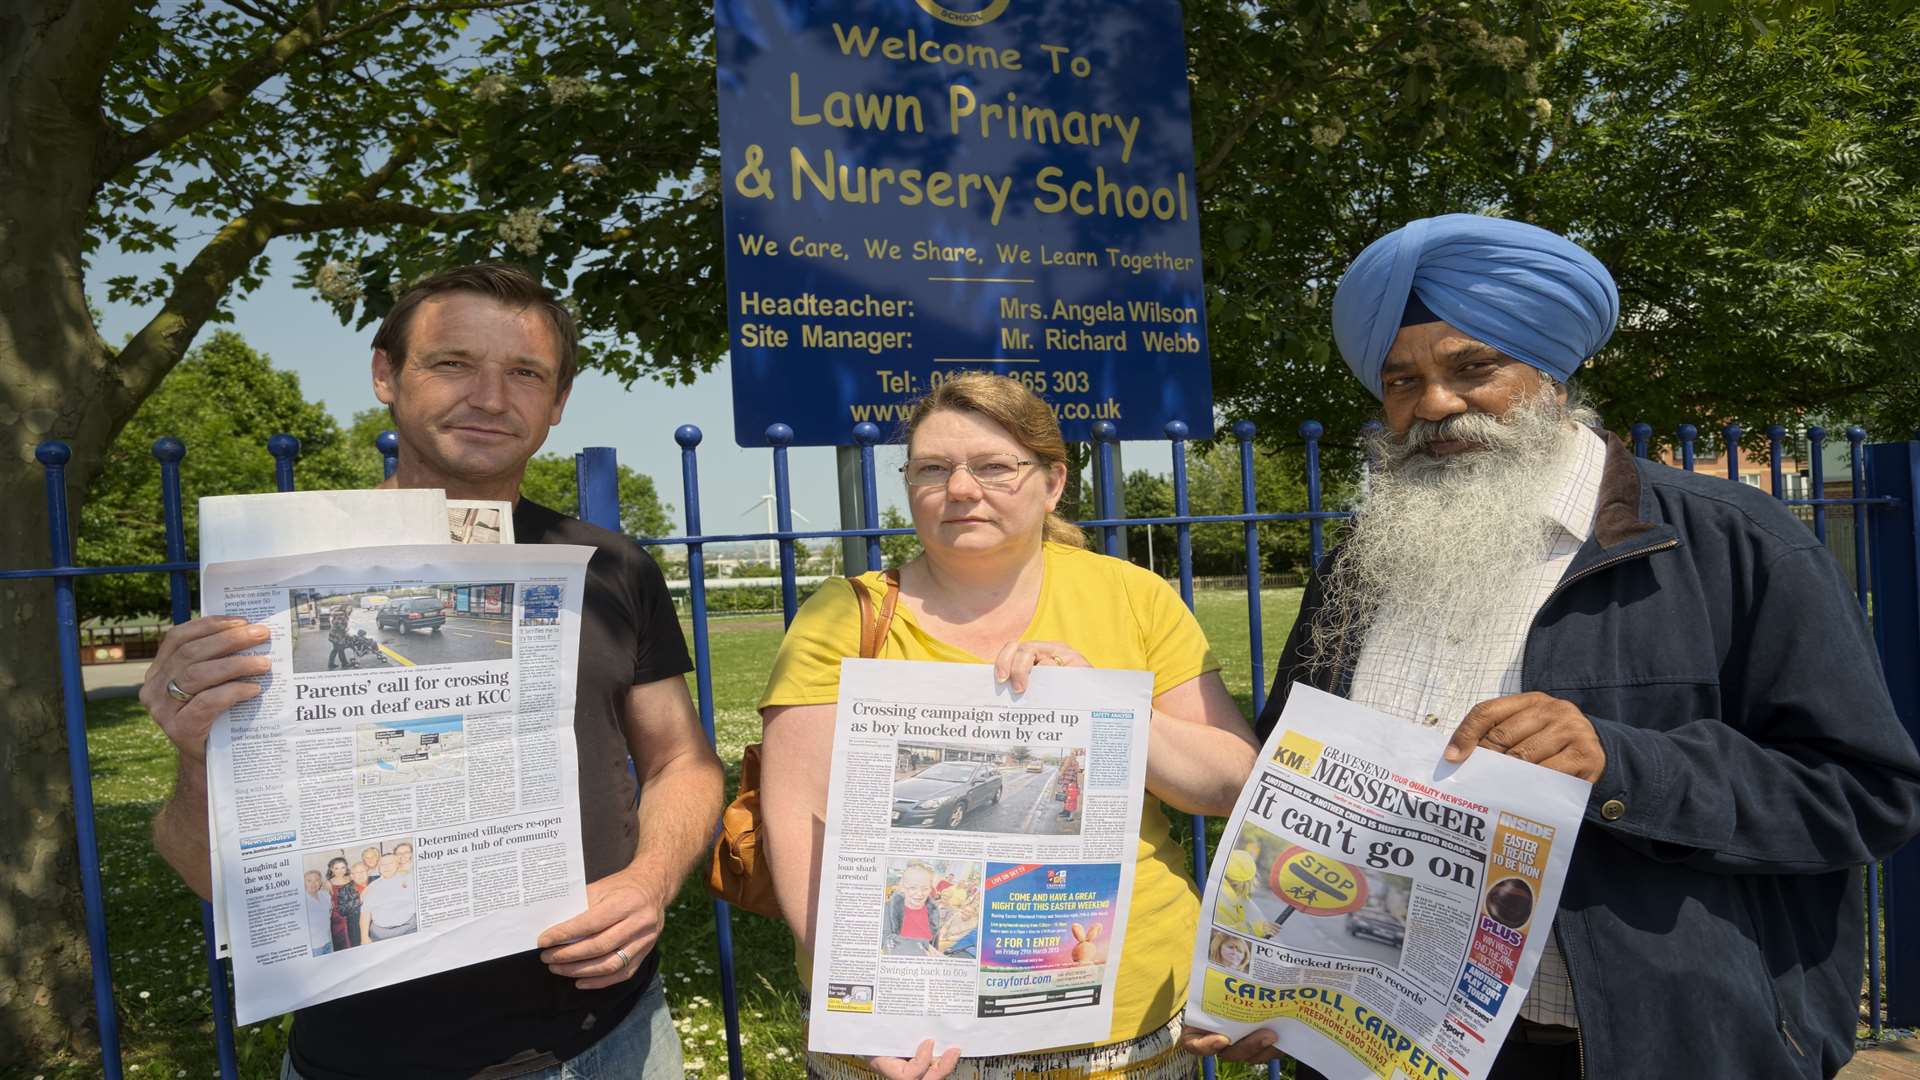 From left, Peter Scollard, Cllr Sue Howes and Cllr Narinder Singh Thandi petitioning in 2013 for a perestrian crossing for High Street, Northfleet, at Lawn Street Primary School.